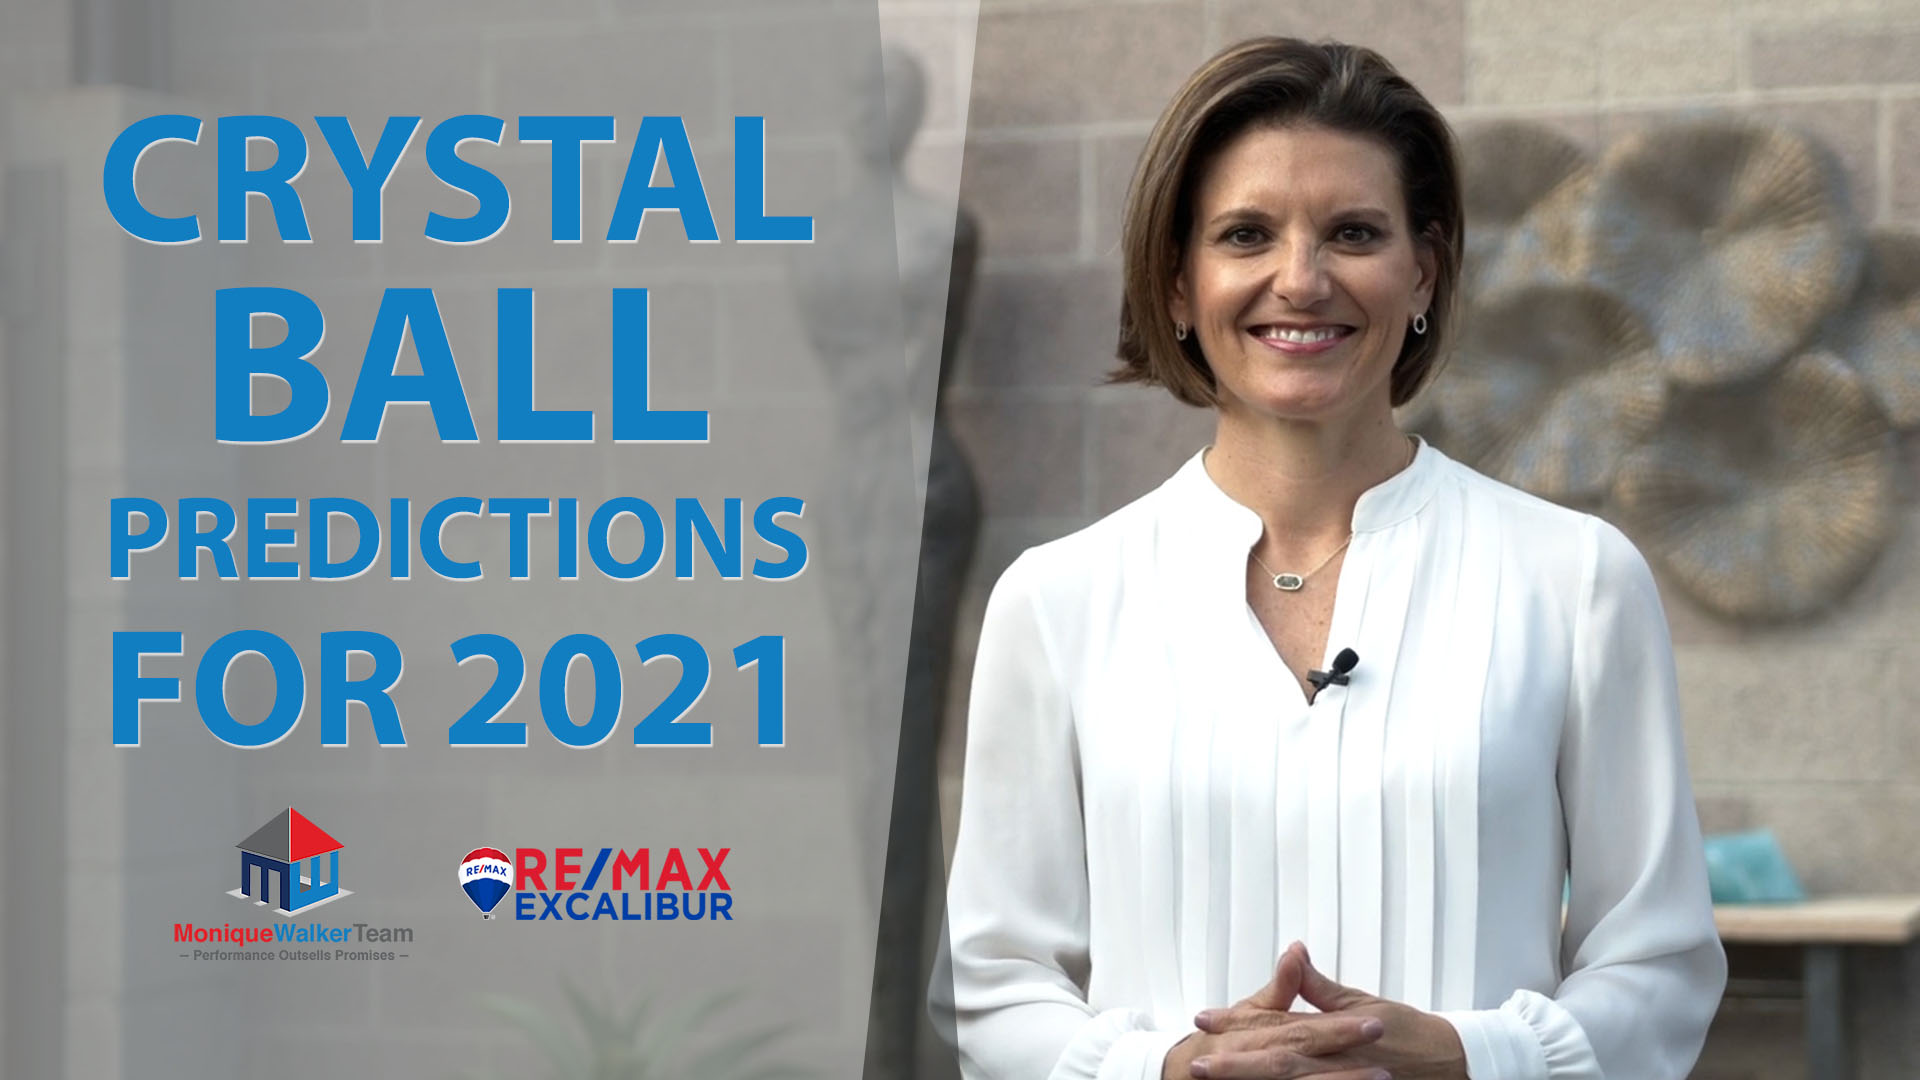 Crystal Ball Predictions for 2021